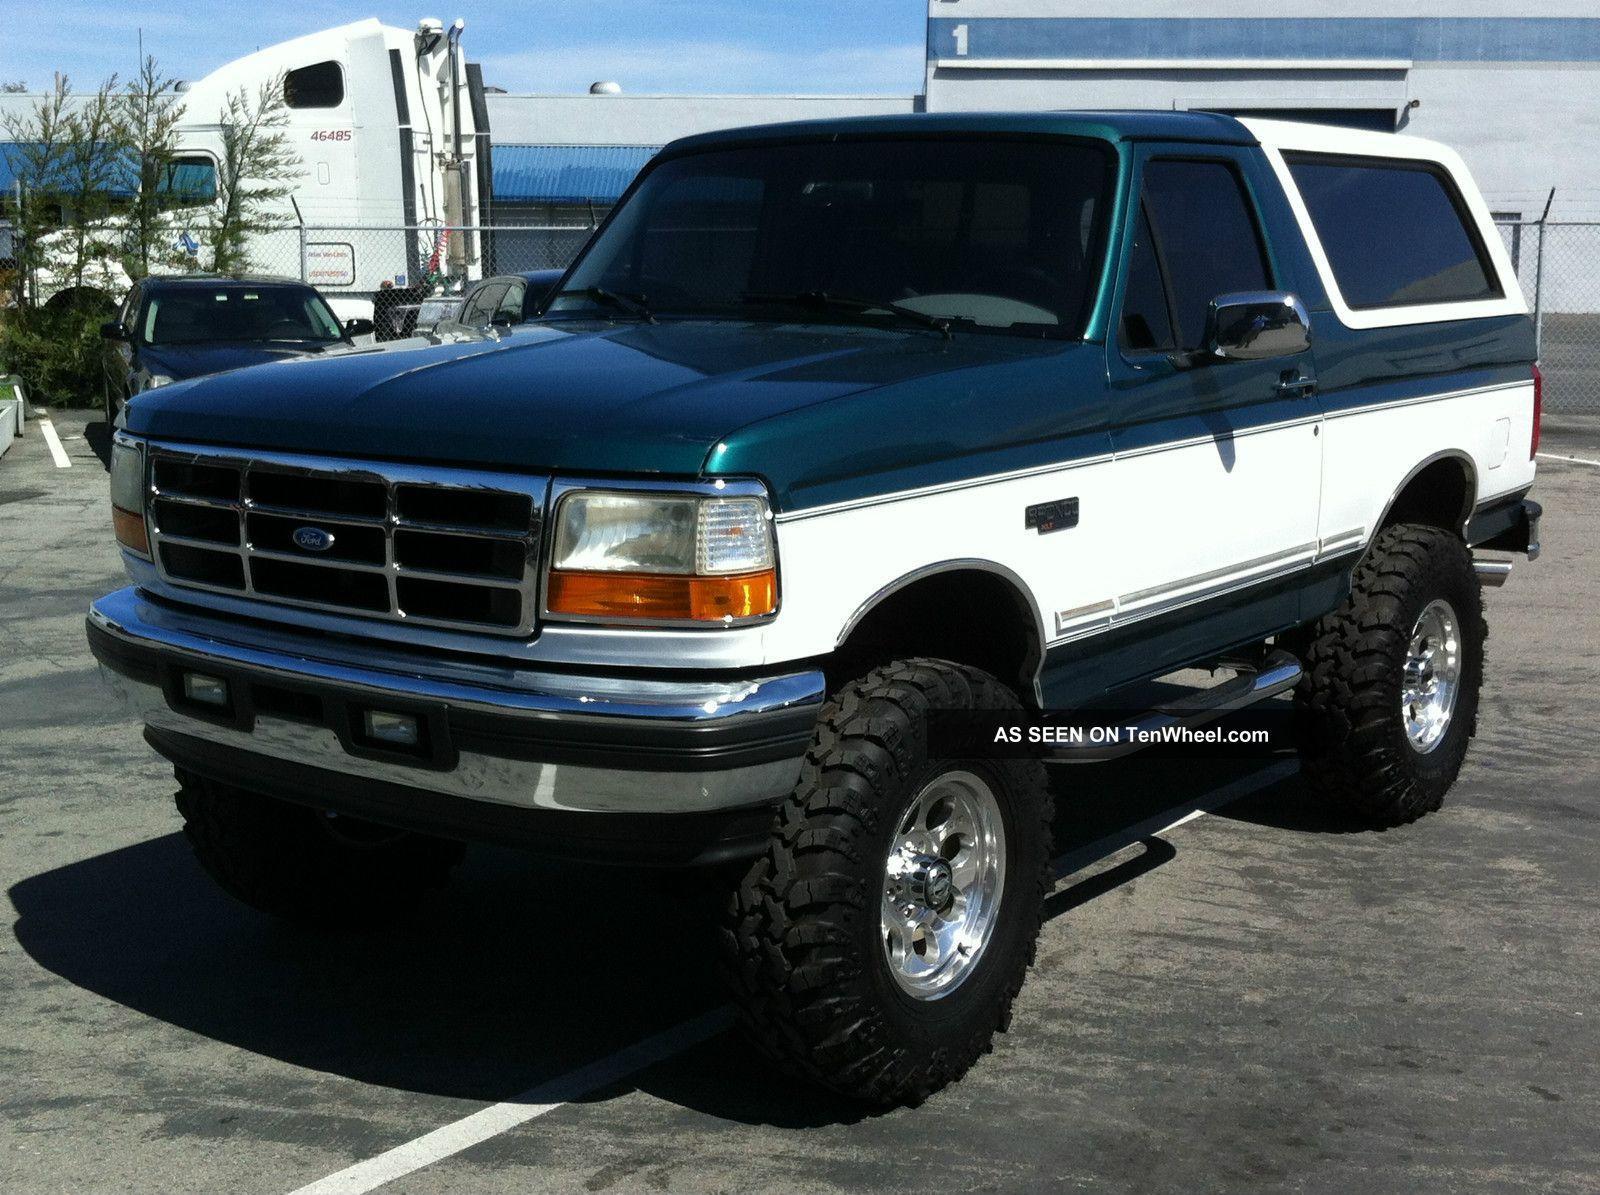 Ford Bronco and photo